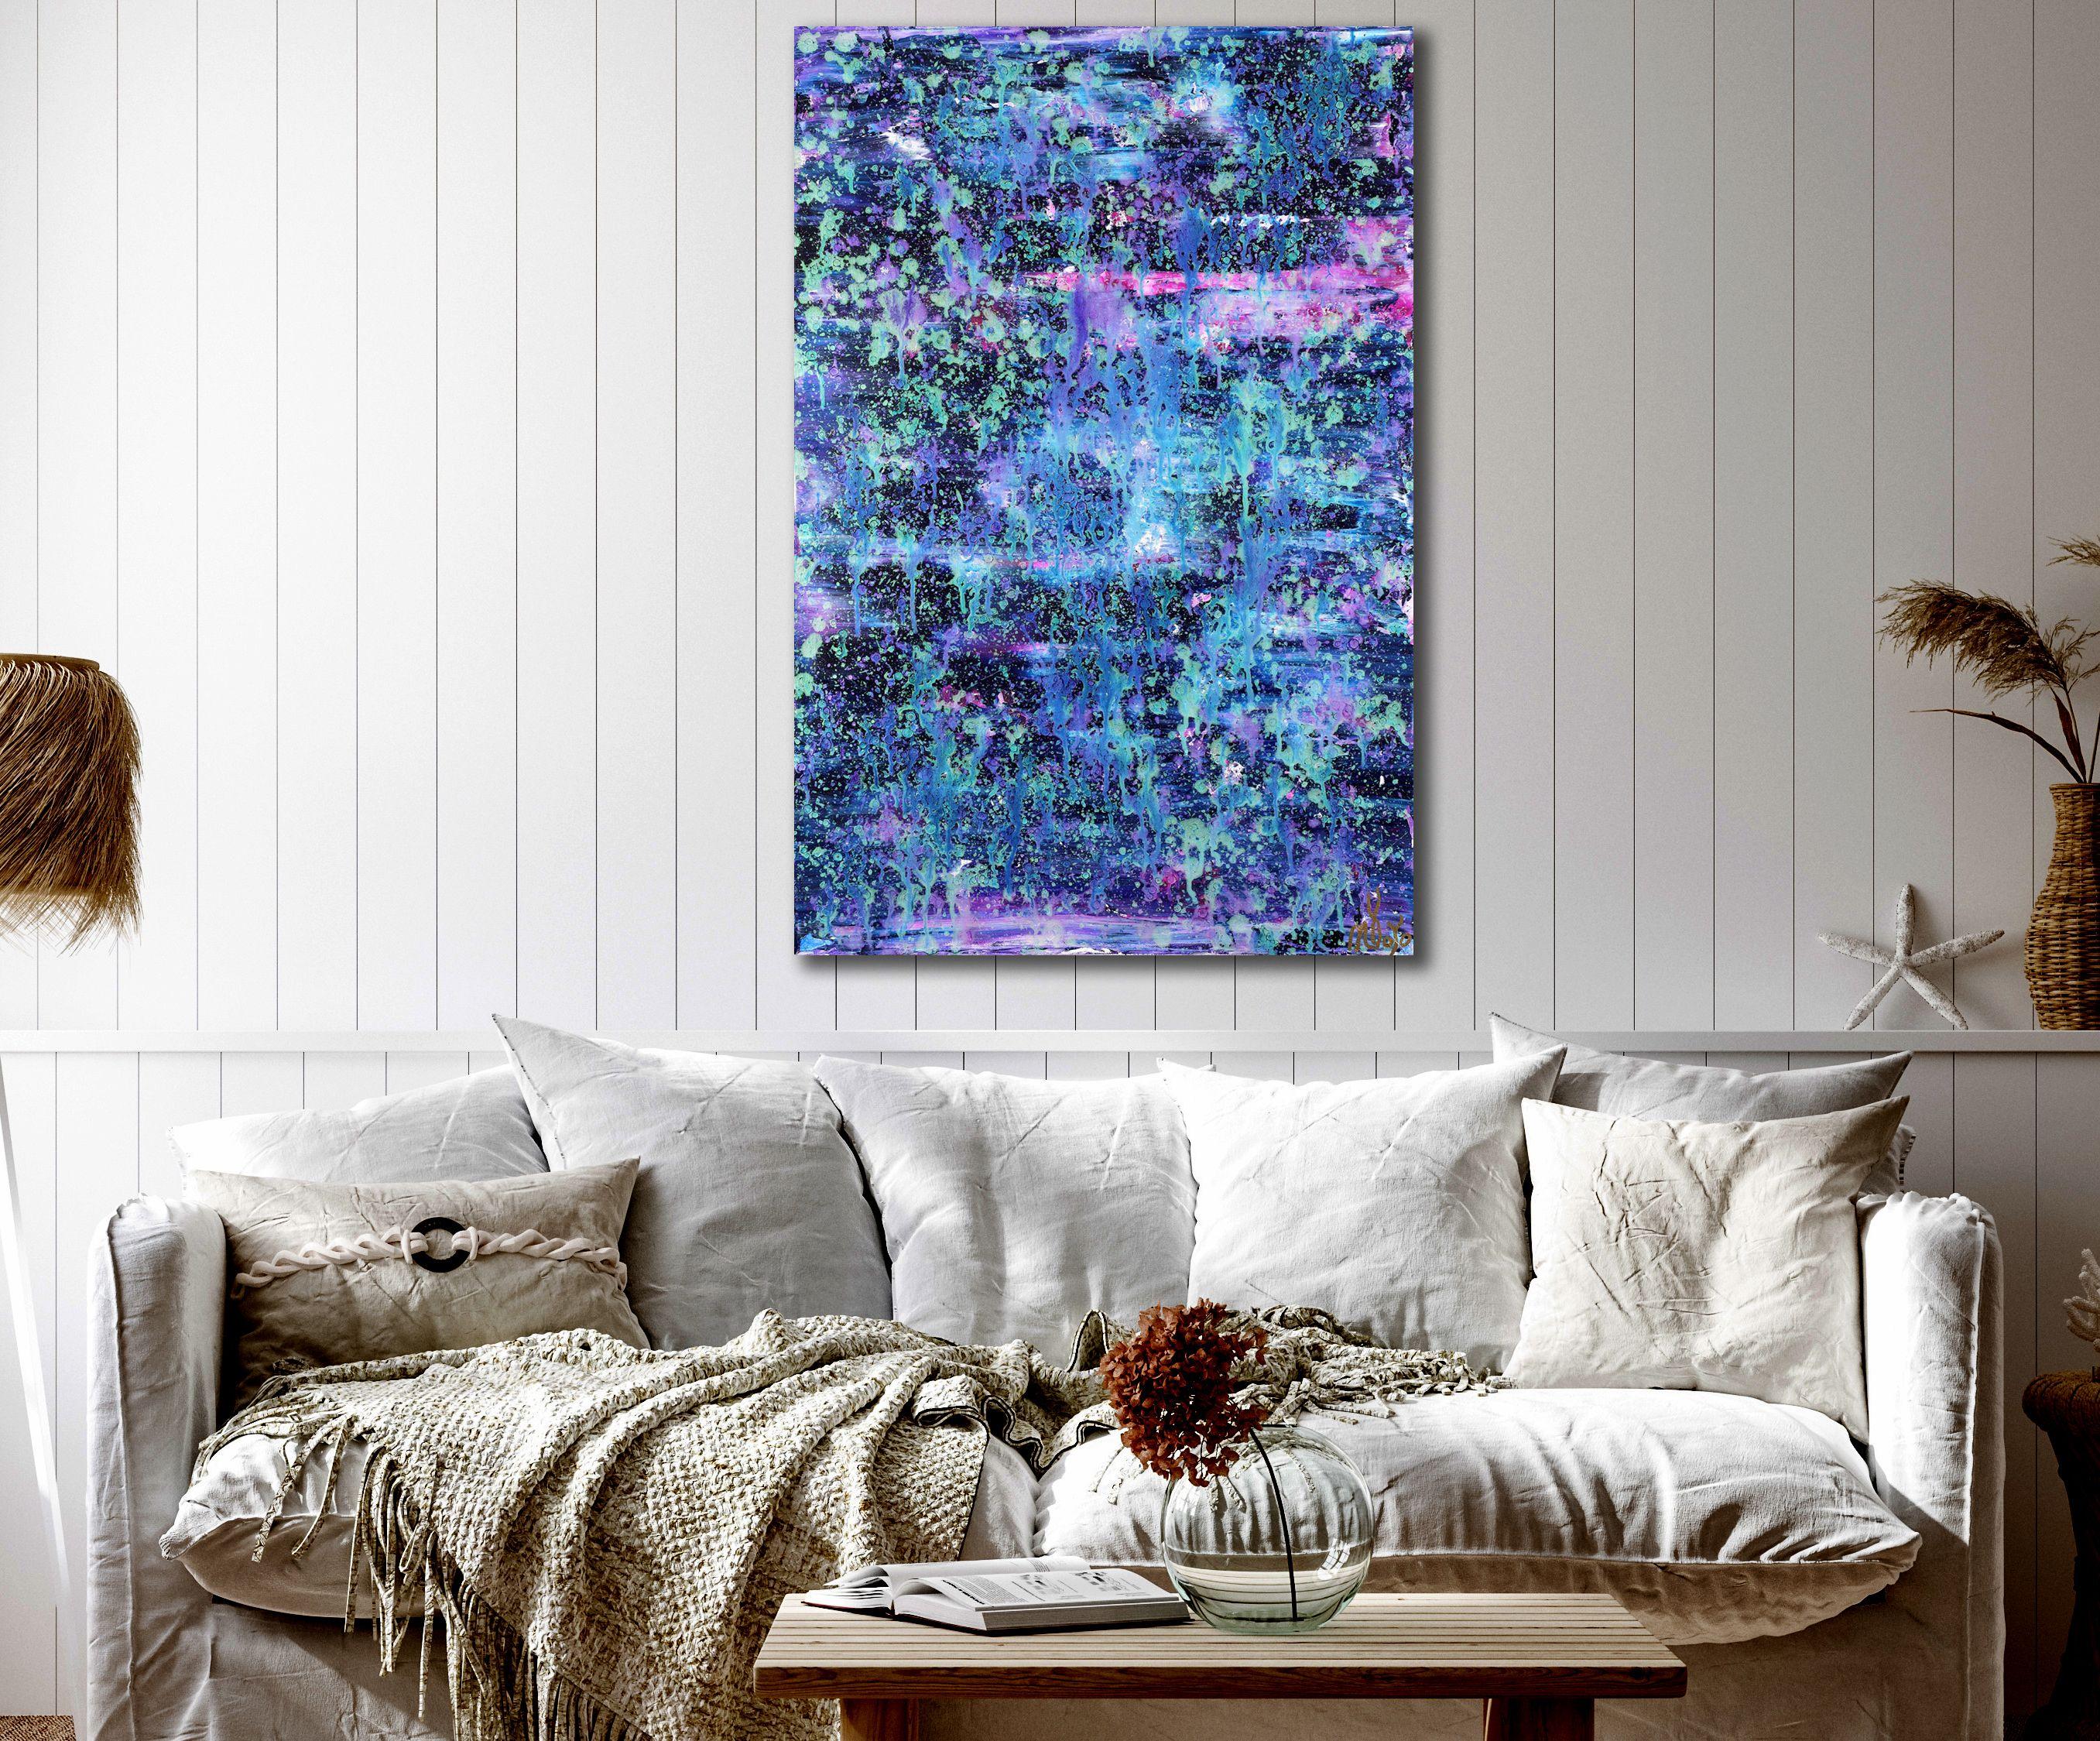 Inspired by nature and rainy landscapes with reflective paint for contrast and details. Textured with layers of blue and iridescent purple and brightness! Inspired by colors of nature with subtle greens and intricate details (see close-ups). This